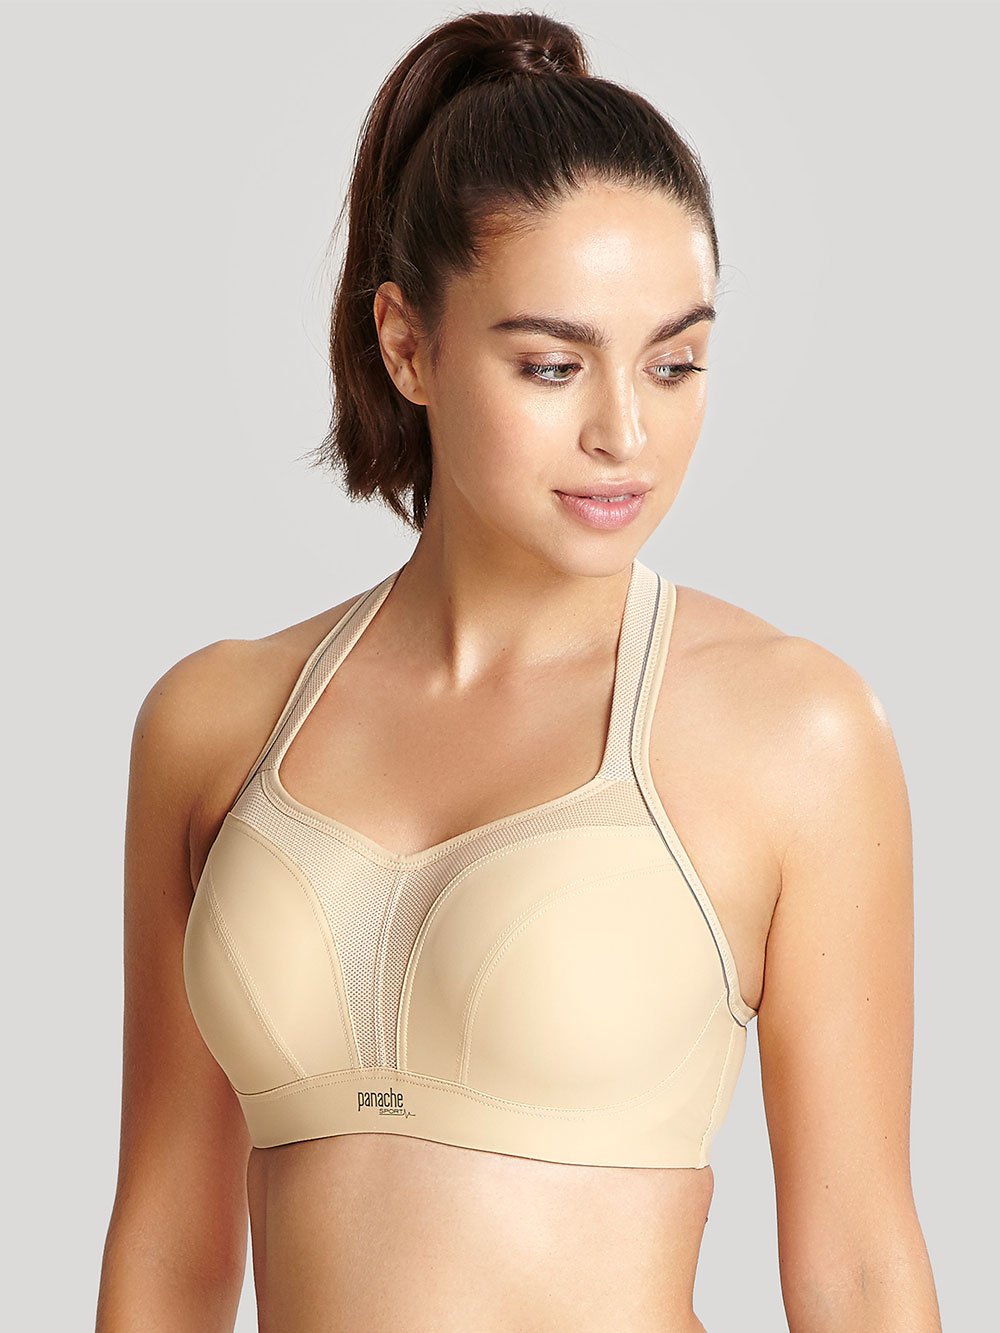 PANACHE sports bra | For ultimate non-wired support